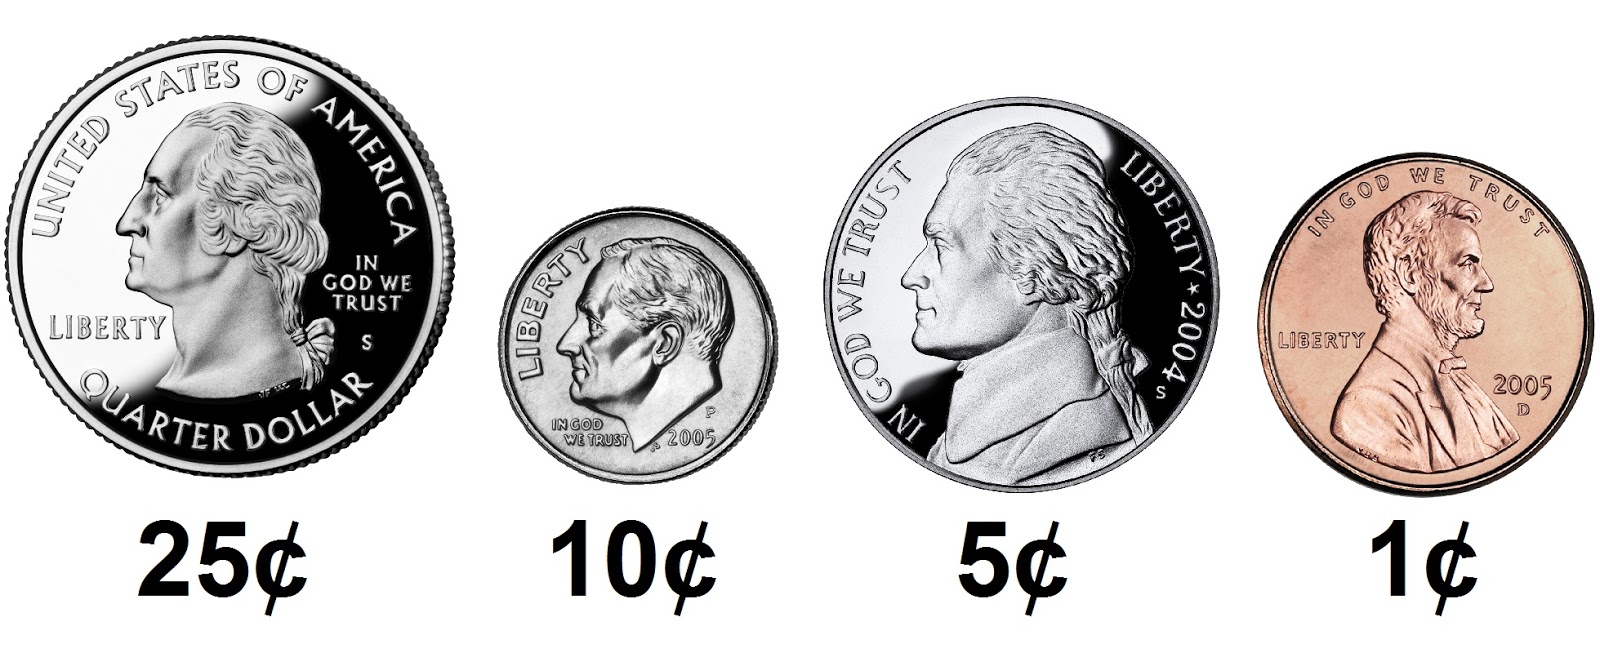 pictures of us coins